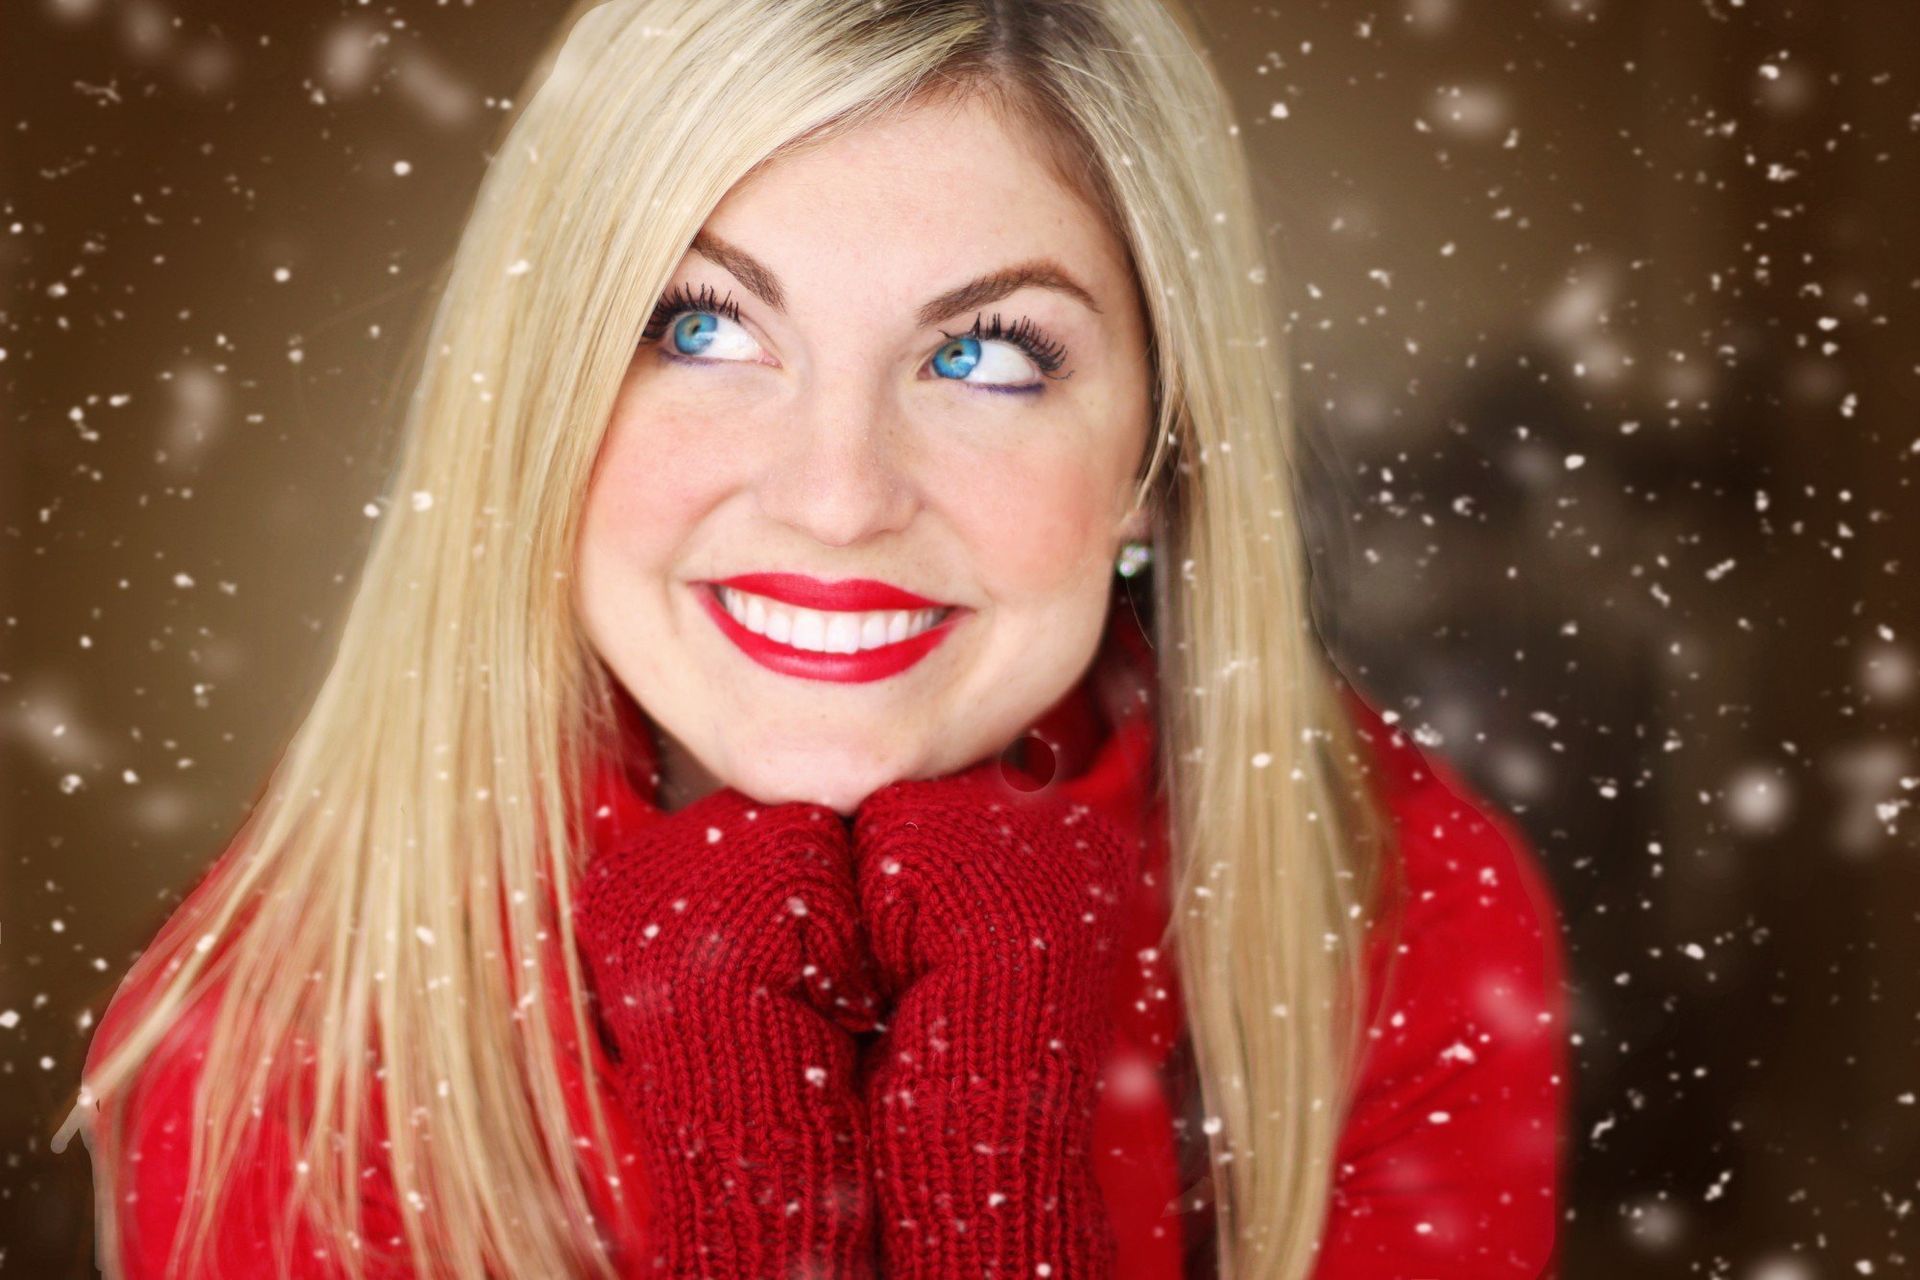 a woman wearing red gloves and a red sweater smiles in the snow